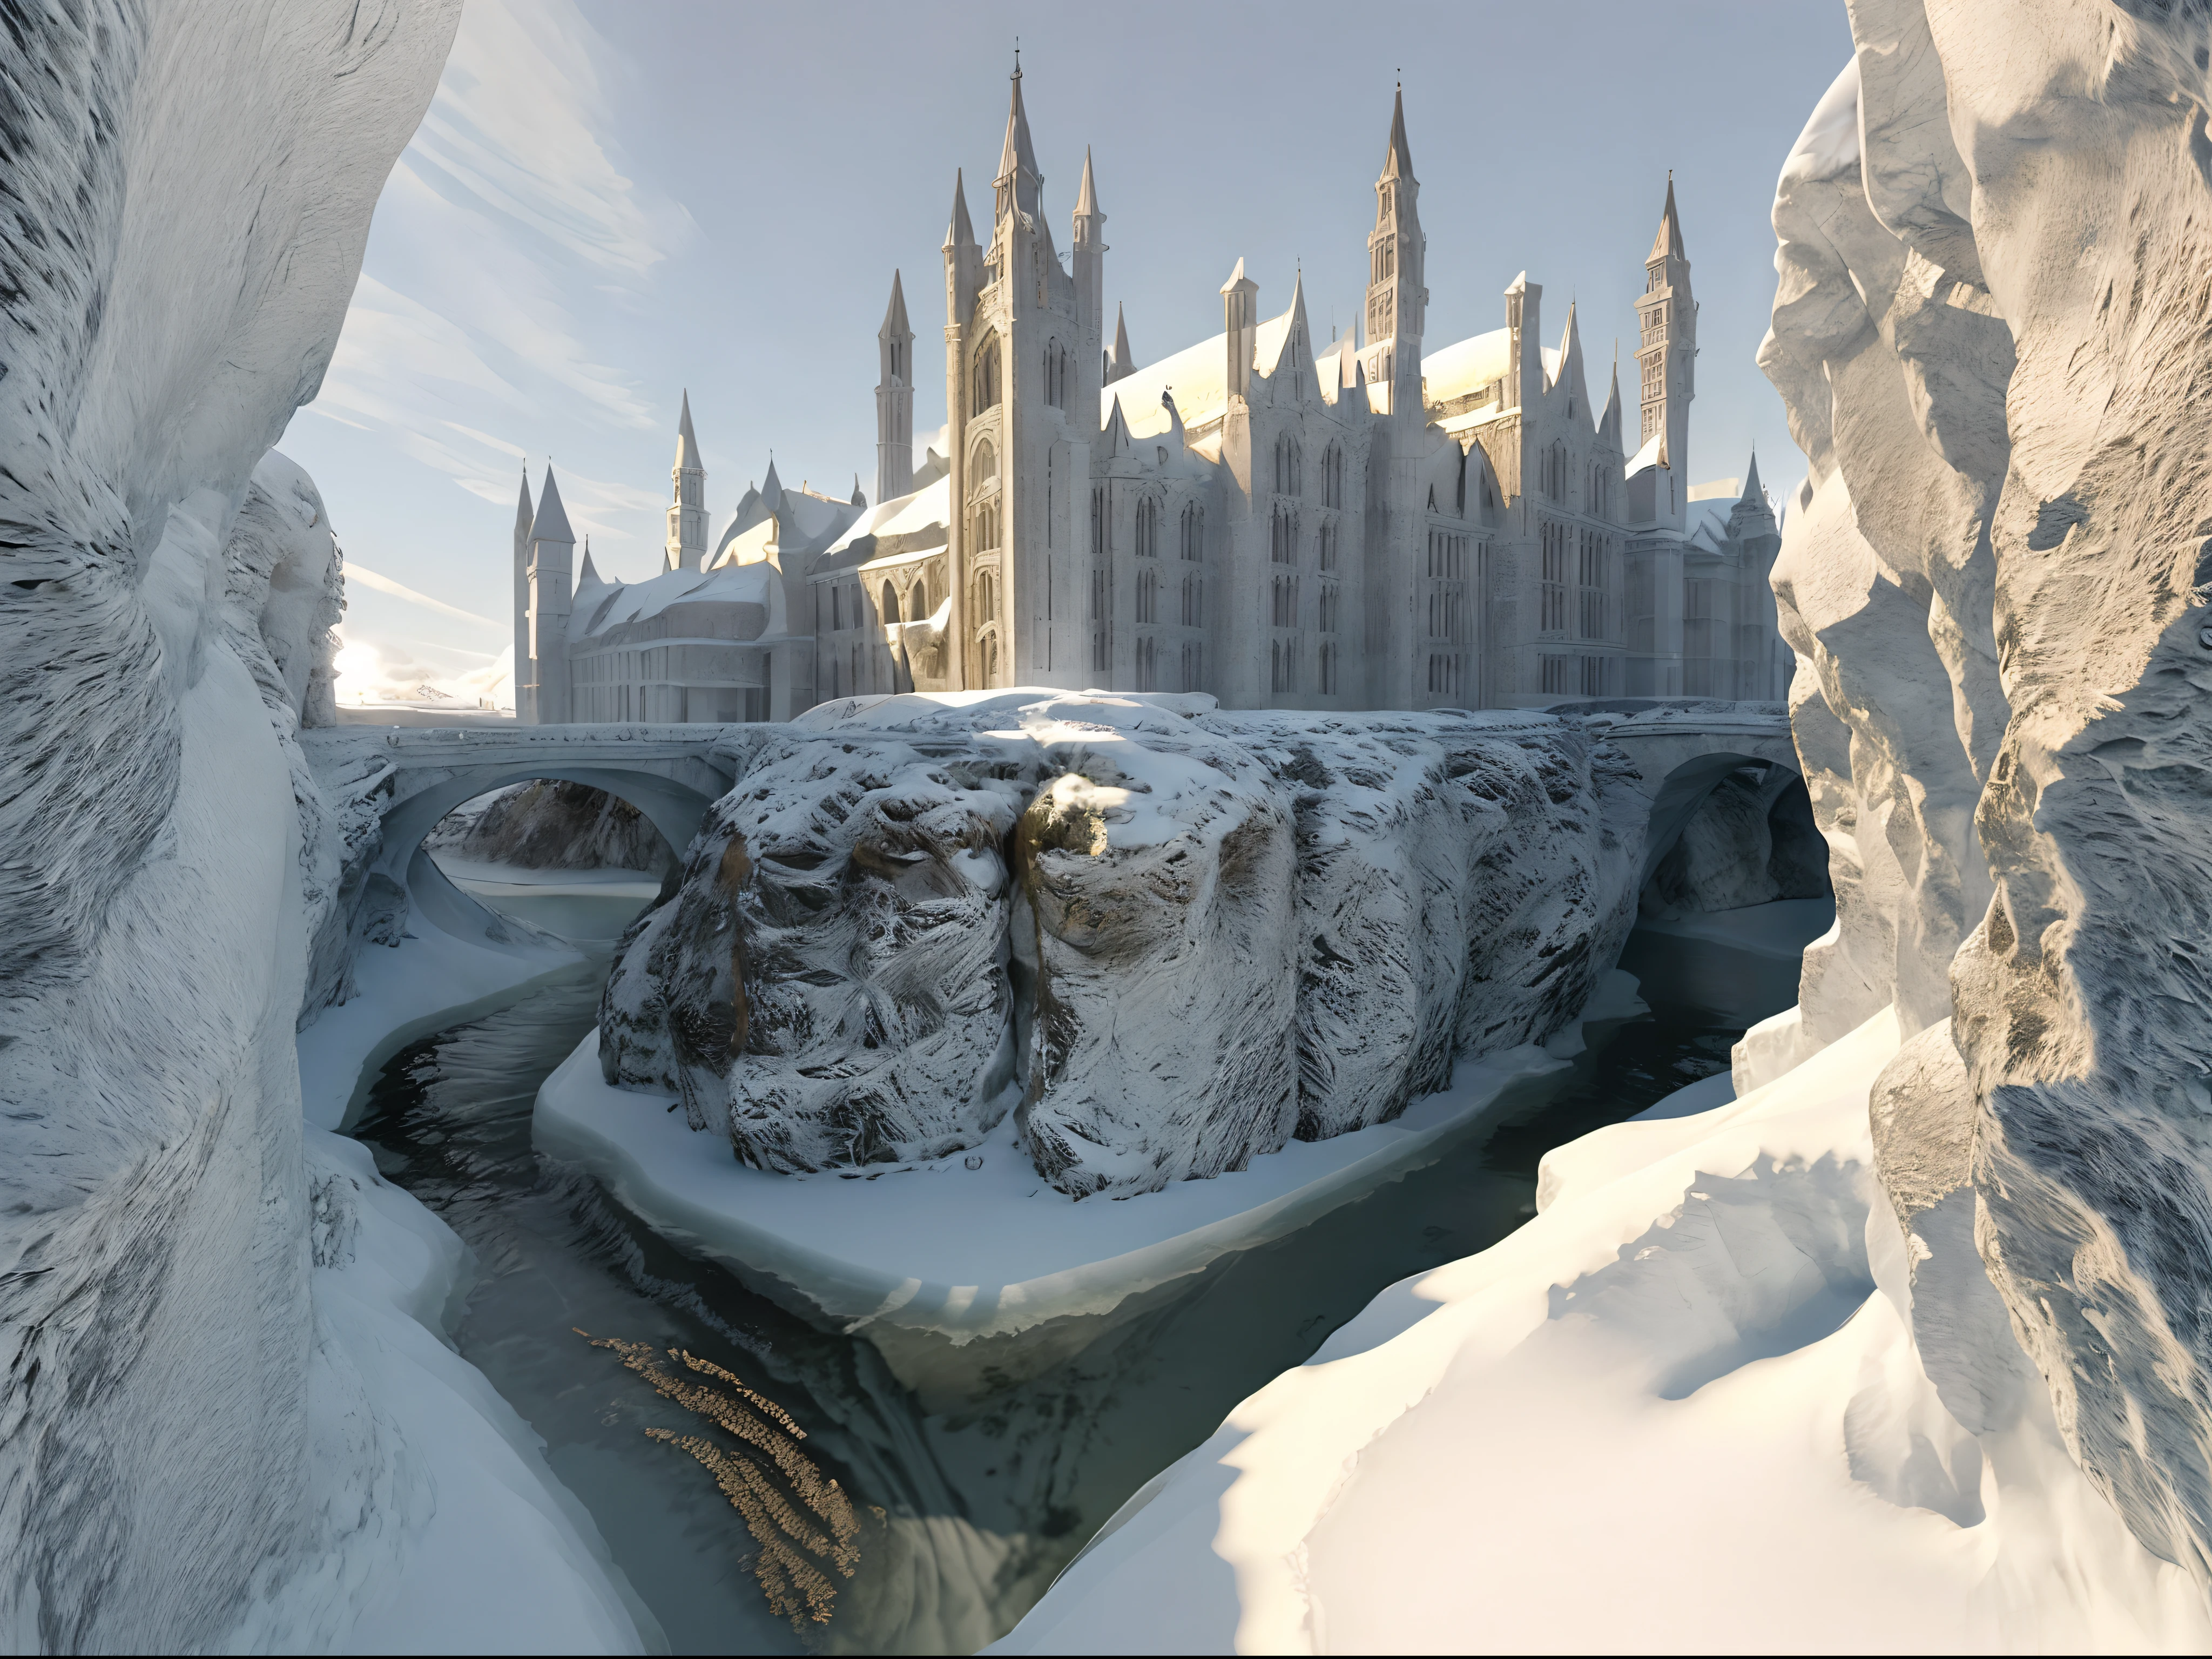 Create a high-quality image of medieval architecture shrouded in ice using advanced AI. Emphasize intricate details and the icy atmosphere. Thank you for your expertise!